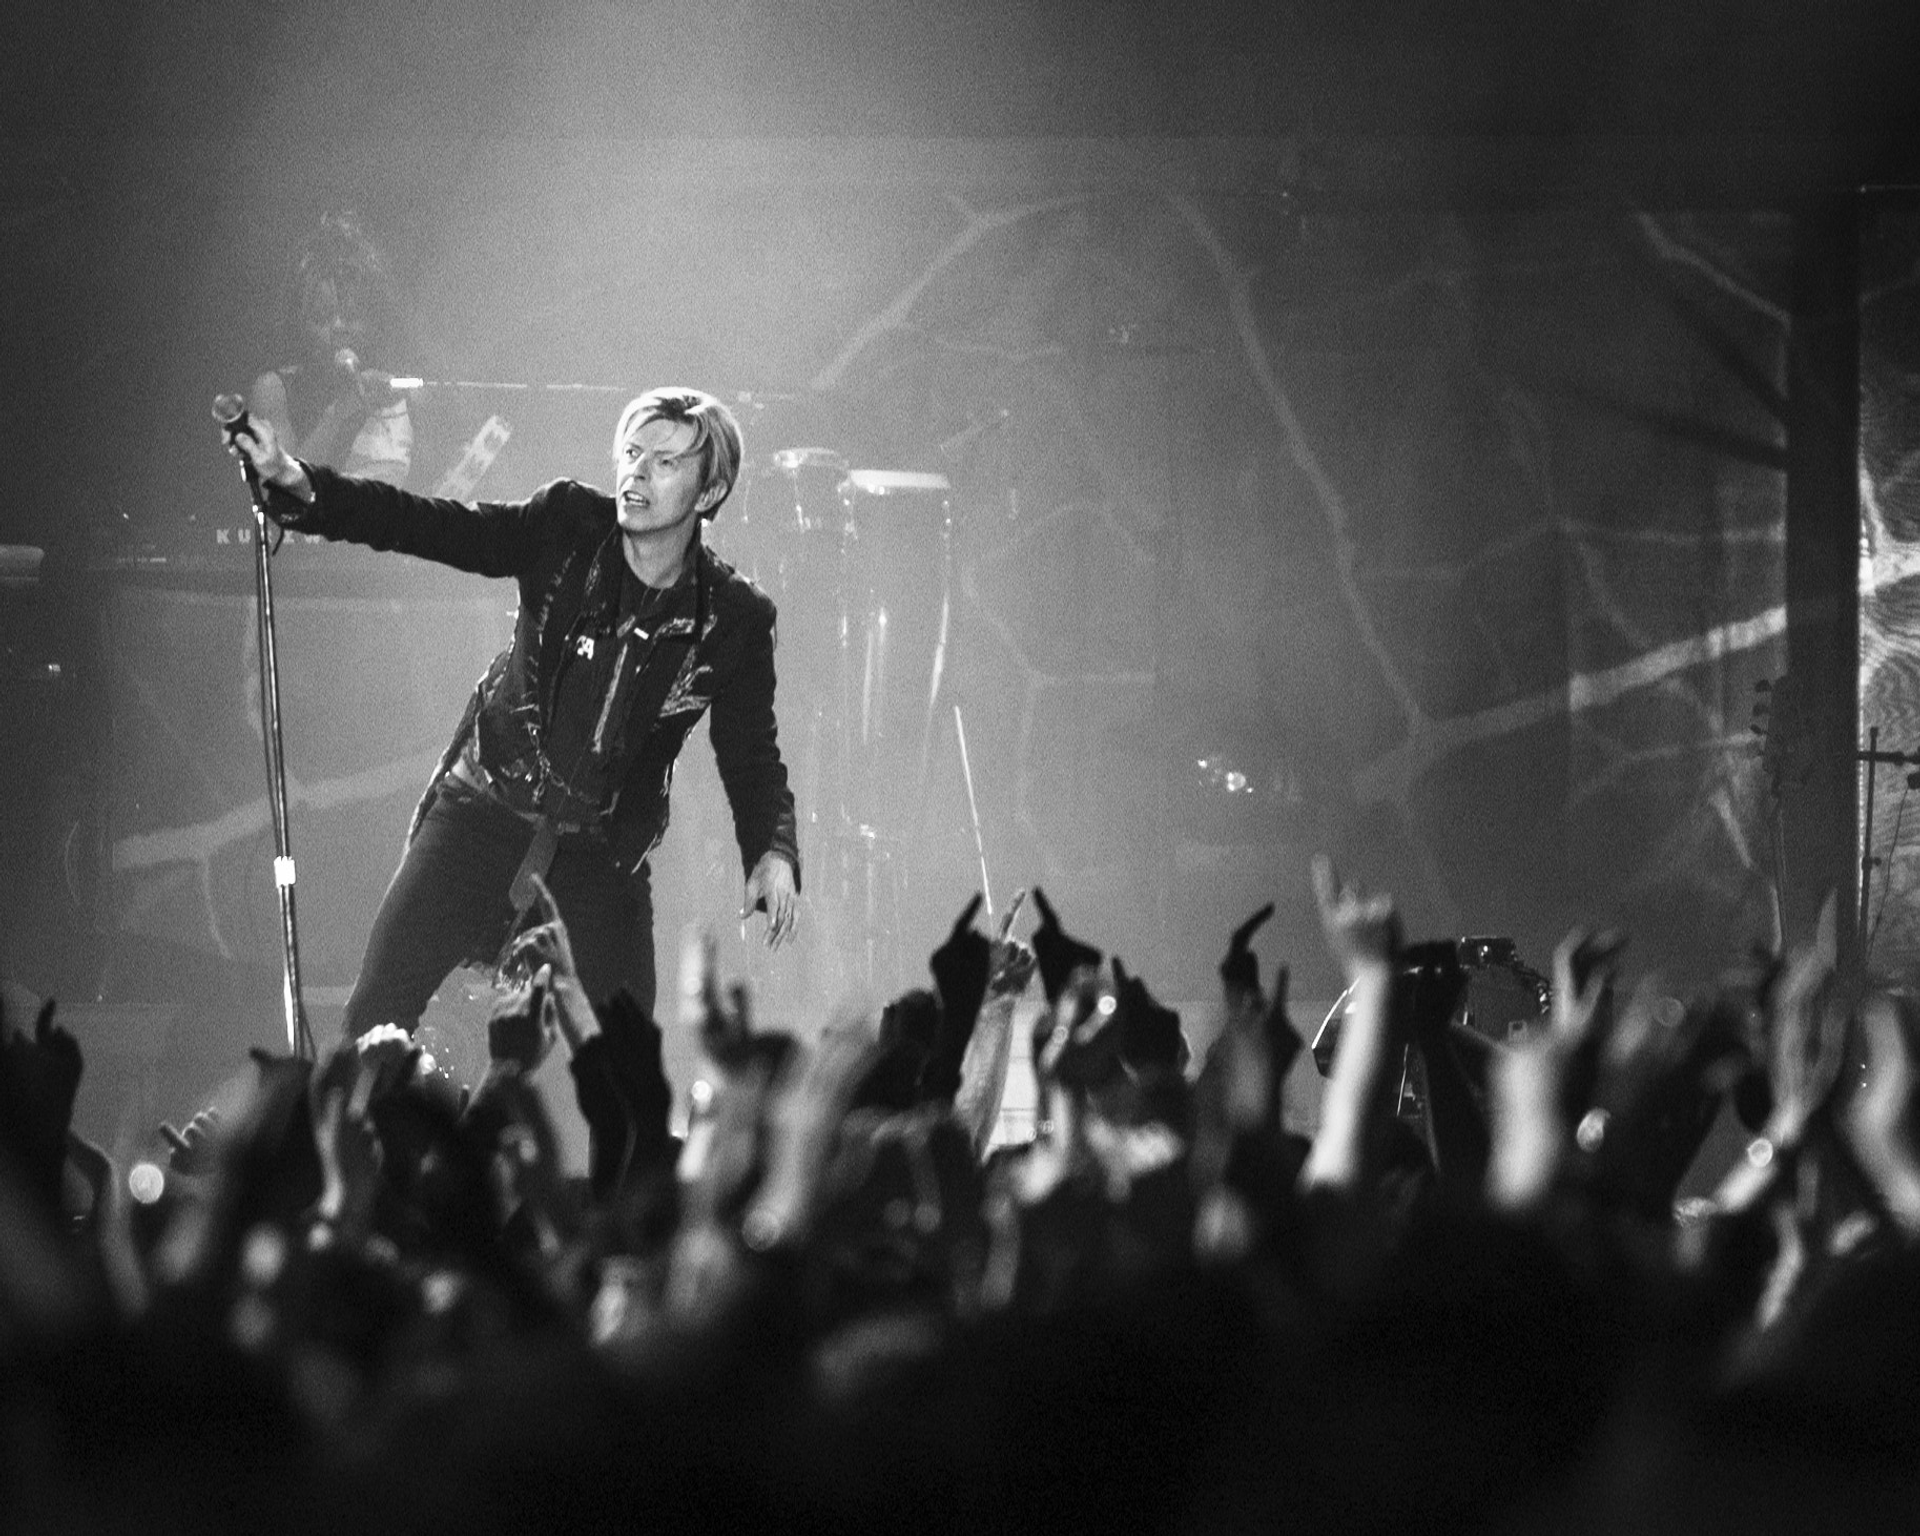 A black-and-white photograph of the musician David Bowie, standing on stage in front of a large crowd. He is wearing black and leaning against the microphone stand.